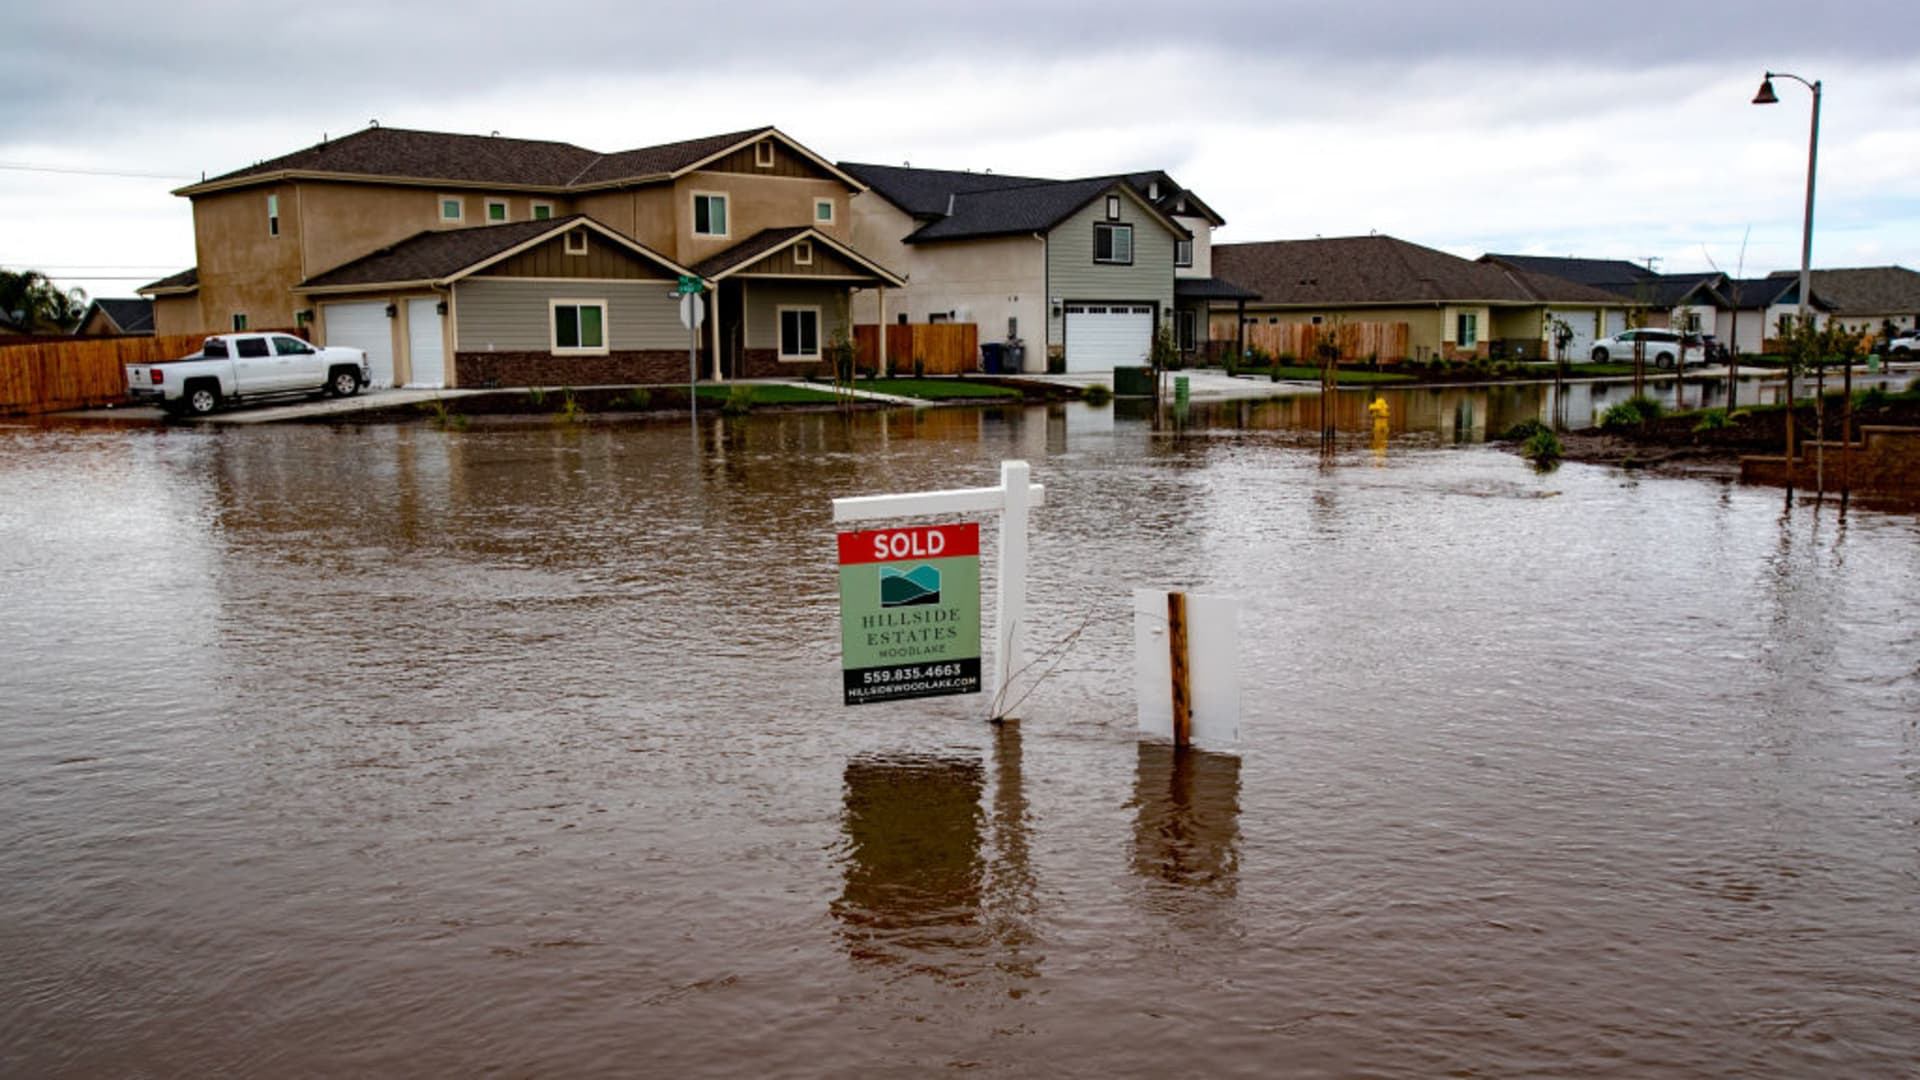 The neighborhood at Hillside Estates is flooded after Tuesday nights heavy rains on March 15, 2023 in Woodlake, California.